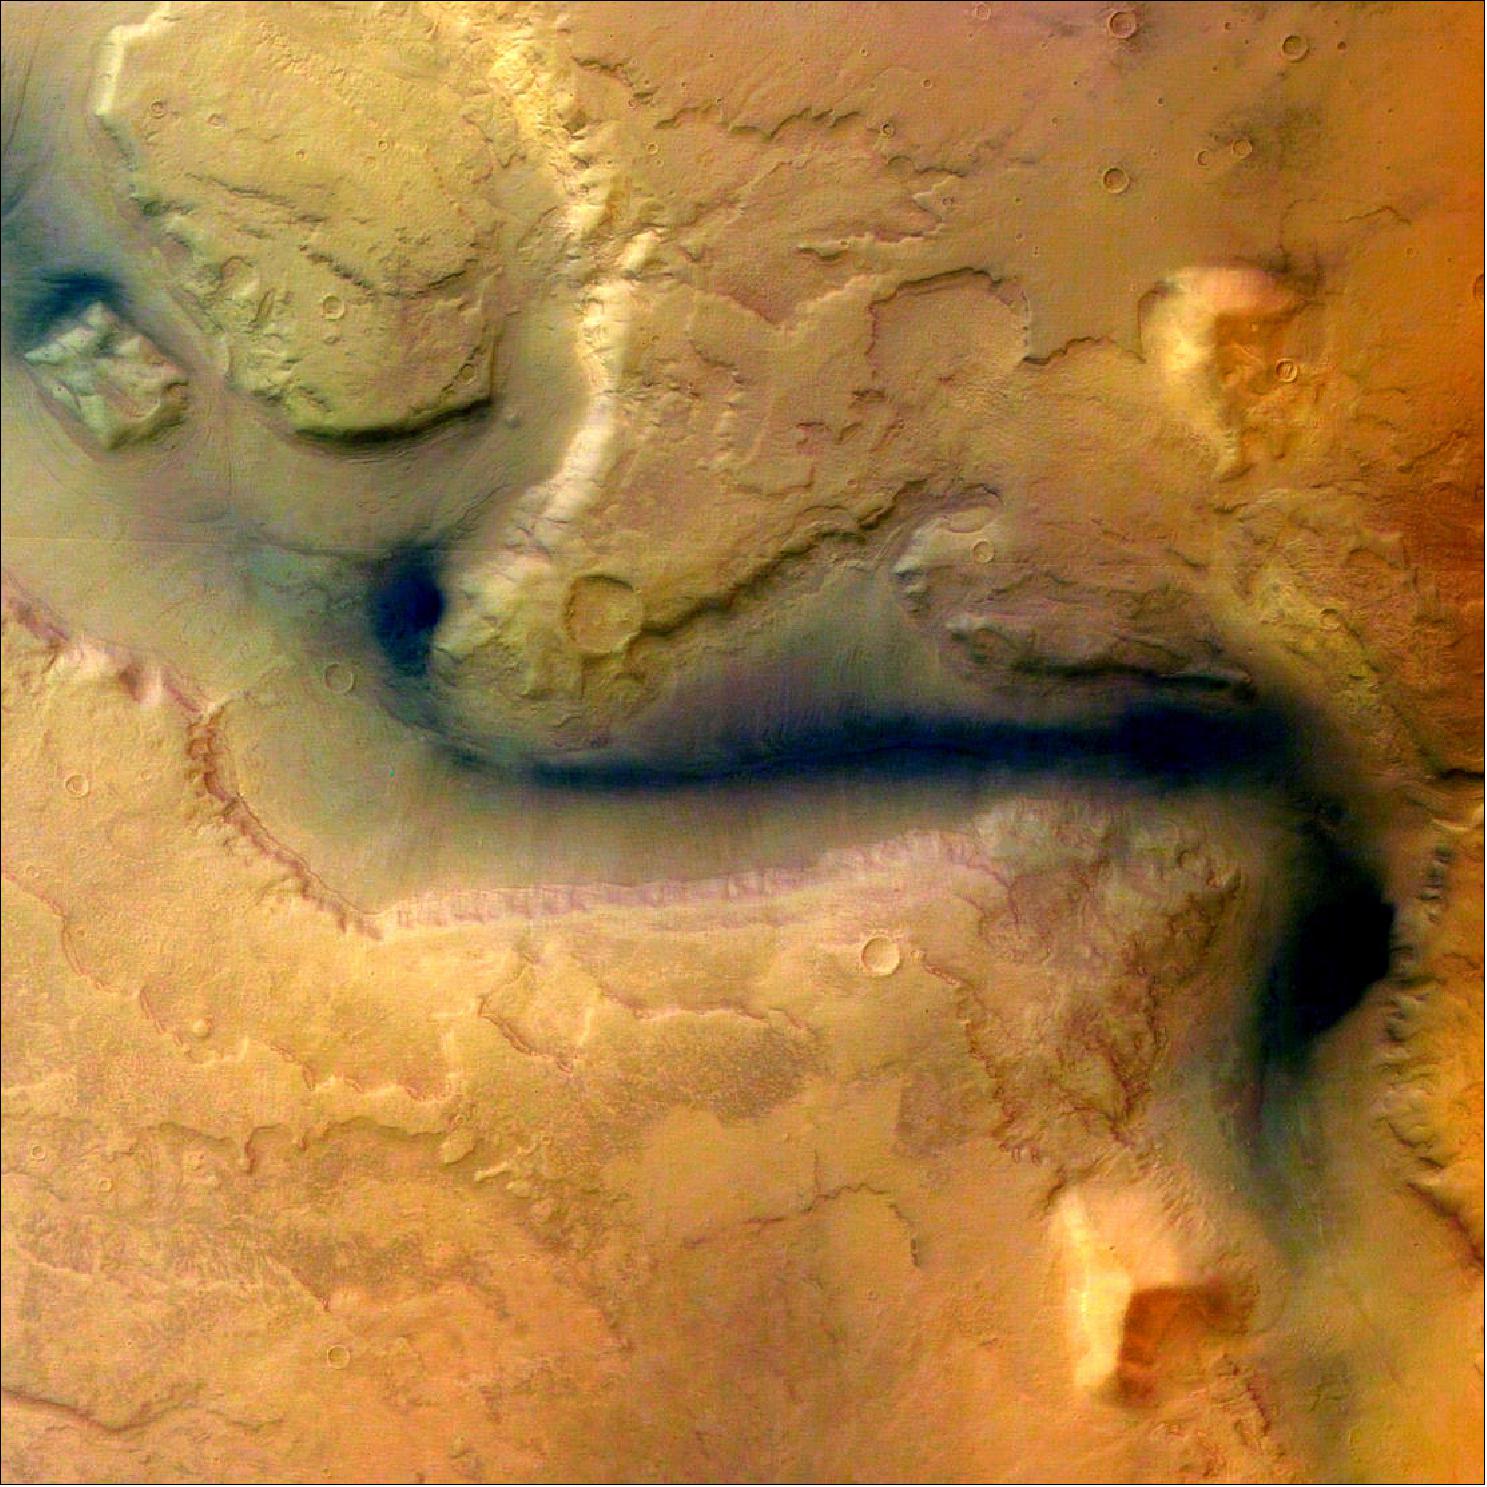 Figure 91: This picture was taken by the High Resolution Stereo Camera (HRSC) onboard ESA's Mars Express orbiter, in color and 3D, in orbit 18 on 15 January 2004 from a height of 273 km. The location is east of the Hellas basin at 41º South and 101º East. The area is 100 km across, with a resolution of 12 m per pixel, and shows a channel (Reull Vallis) once formed by flowing water. The landscape is seen in a vertical view, North is at the top (image credit: ESA/DLR/FU Berlin (G. Neukum), CC BY-SA 3.0 IGO)